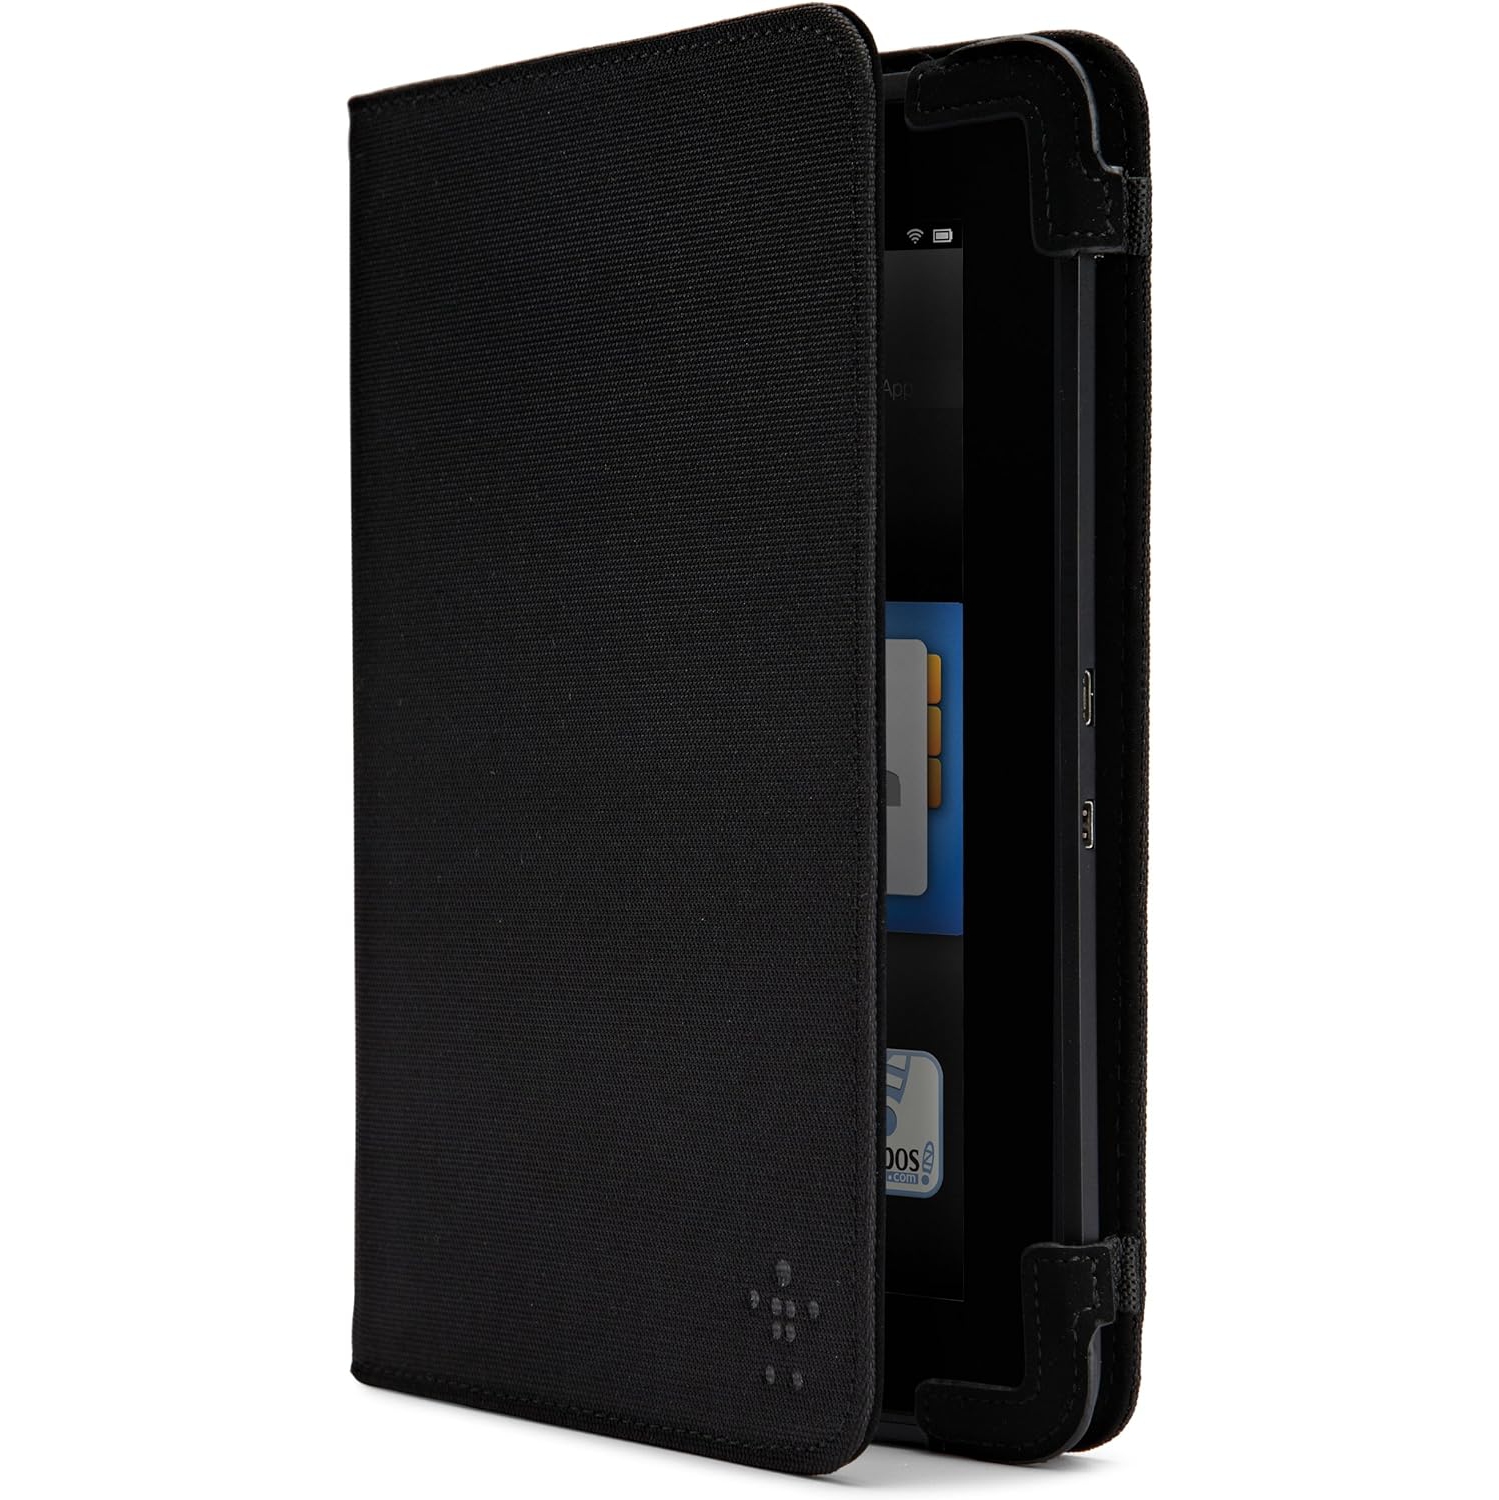 Classic Case for Kindle Fire HD 7", Blacktop (will only fit Kindle Fire HD 7")